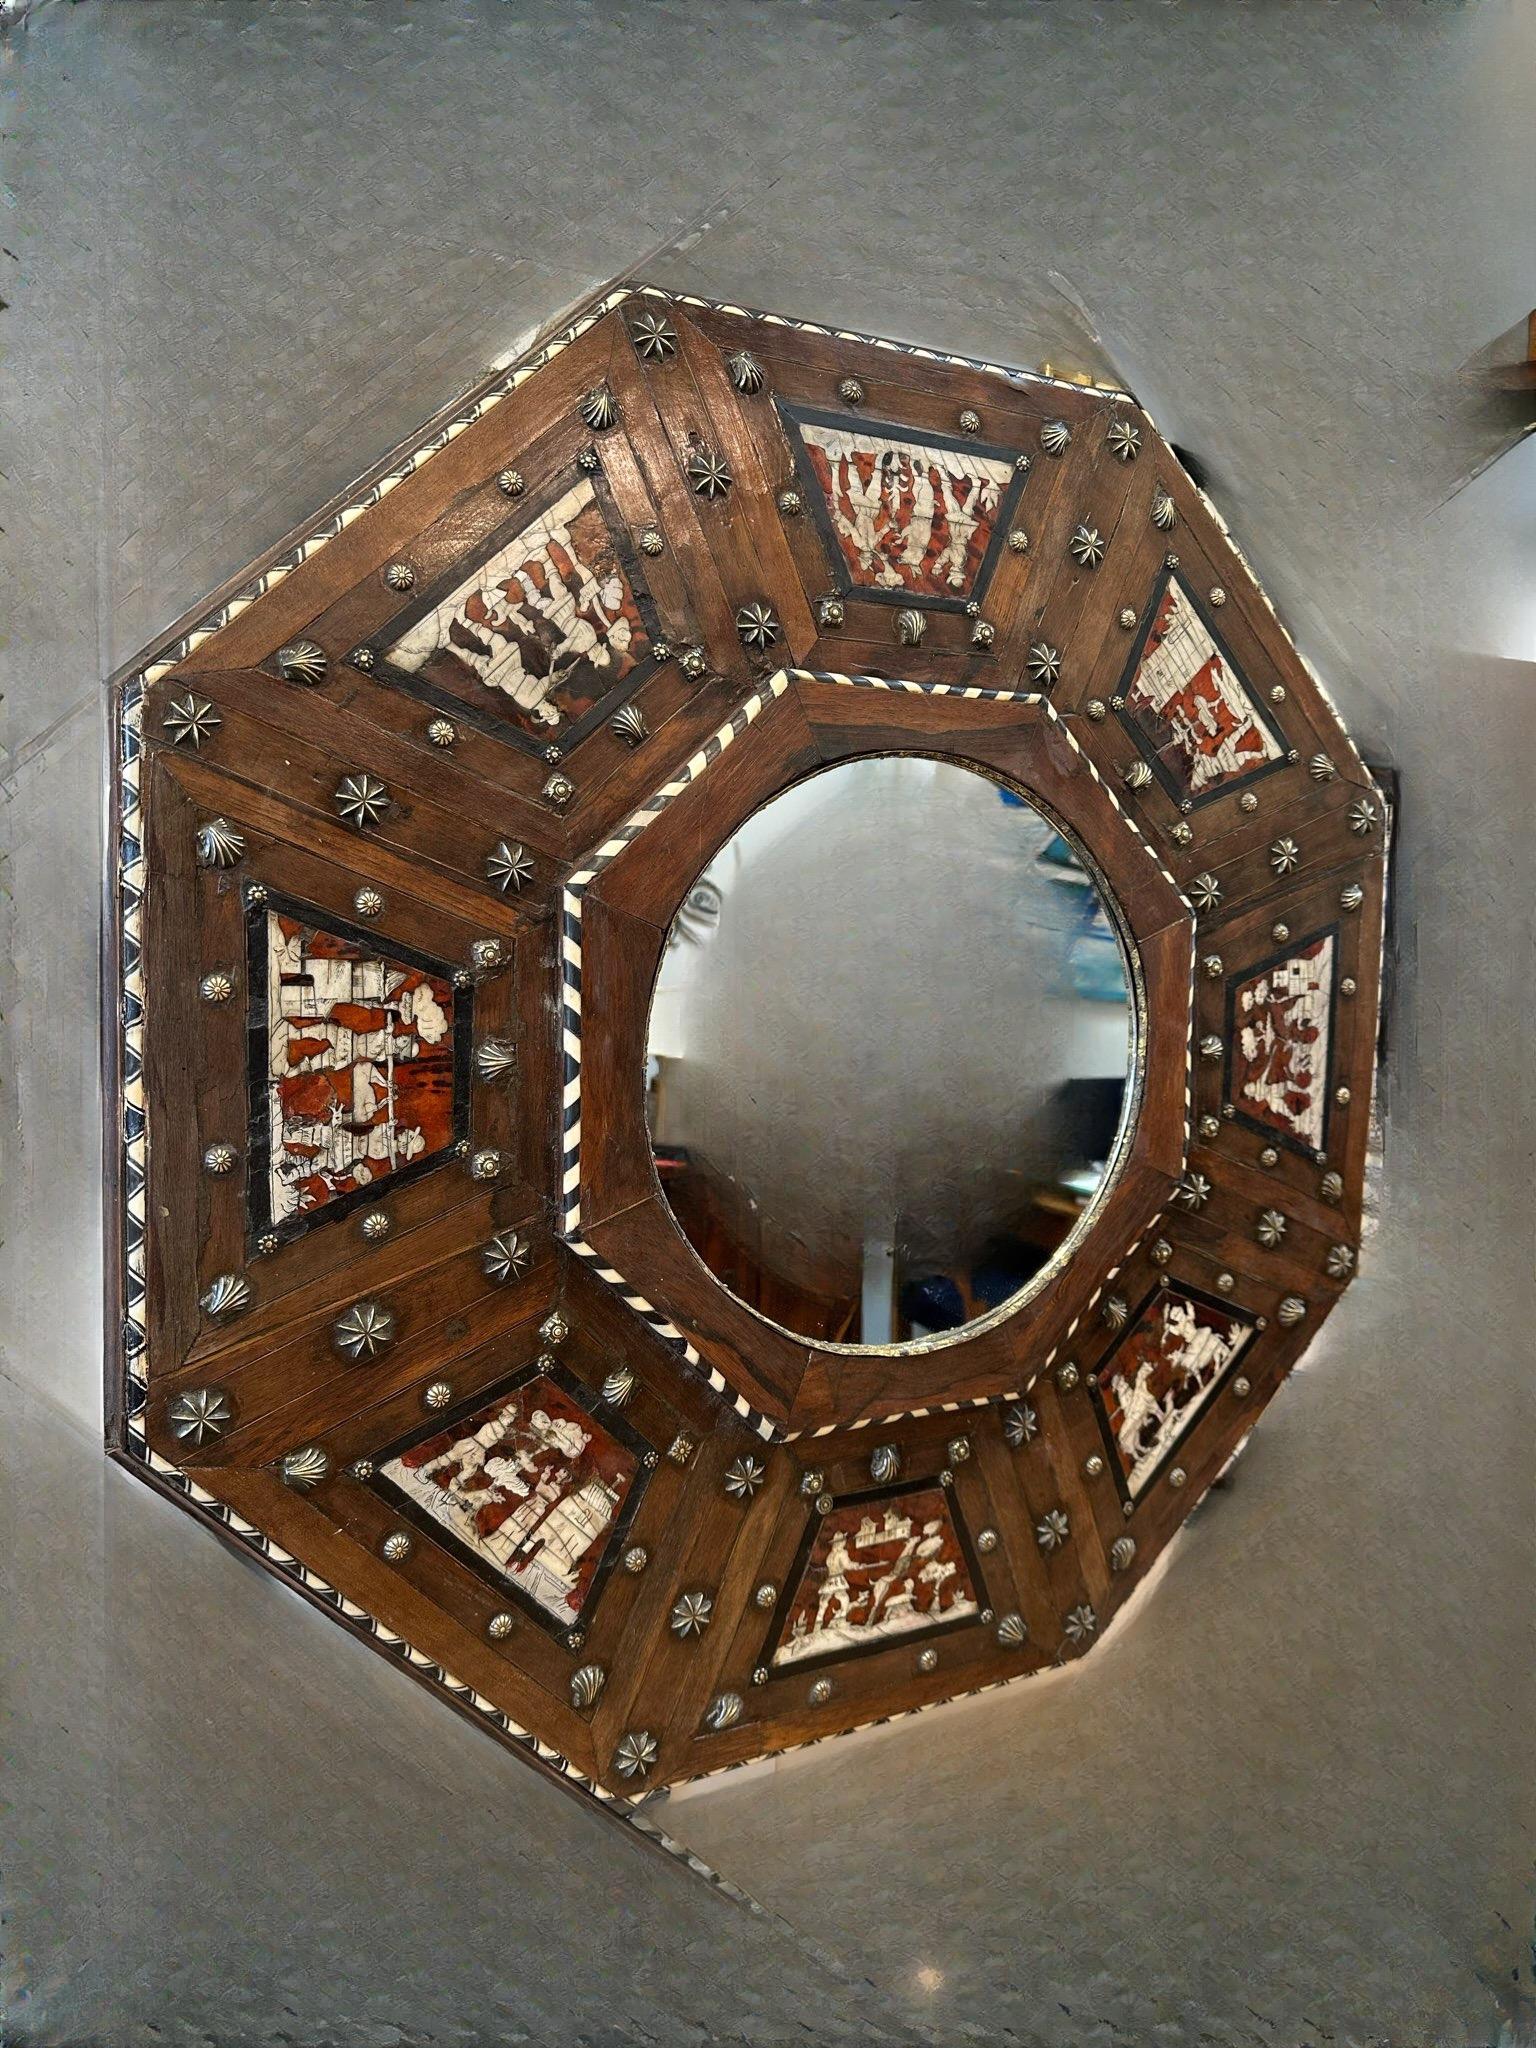 Rare 17th Century Octagonal Baroque Inlaid Wood Framed Mirror. Made of deeply patinated walnut and Rosewood with intricate inlaid Ivory and tortoise shell medieval designs with brass, silver and ebony accents. Amazing Craftsmanship. Made in Portugal